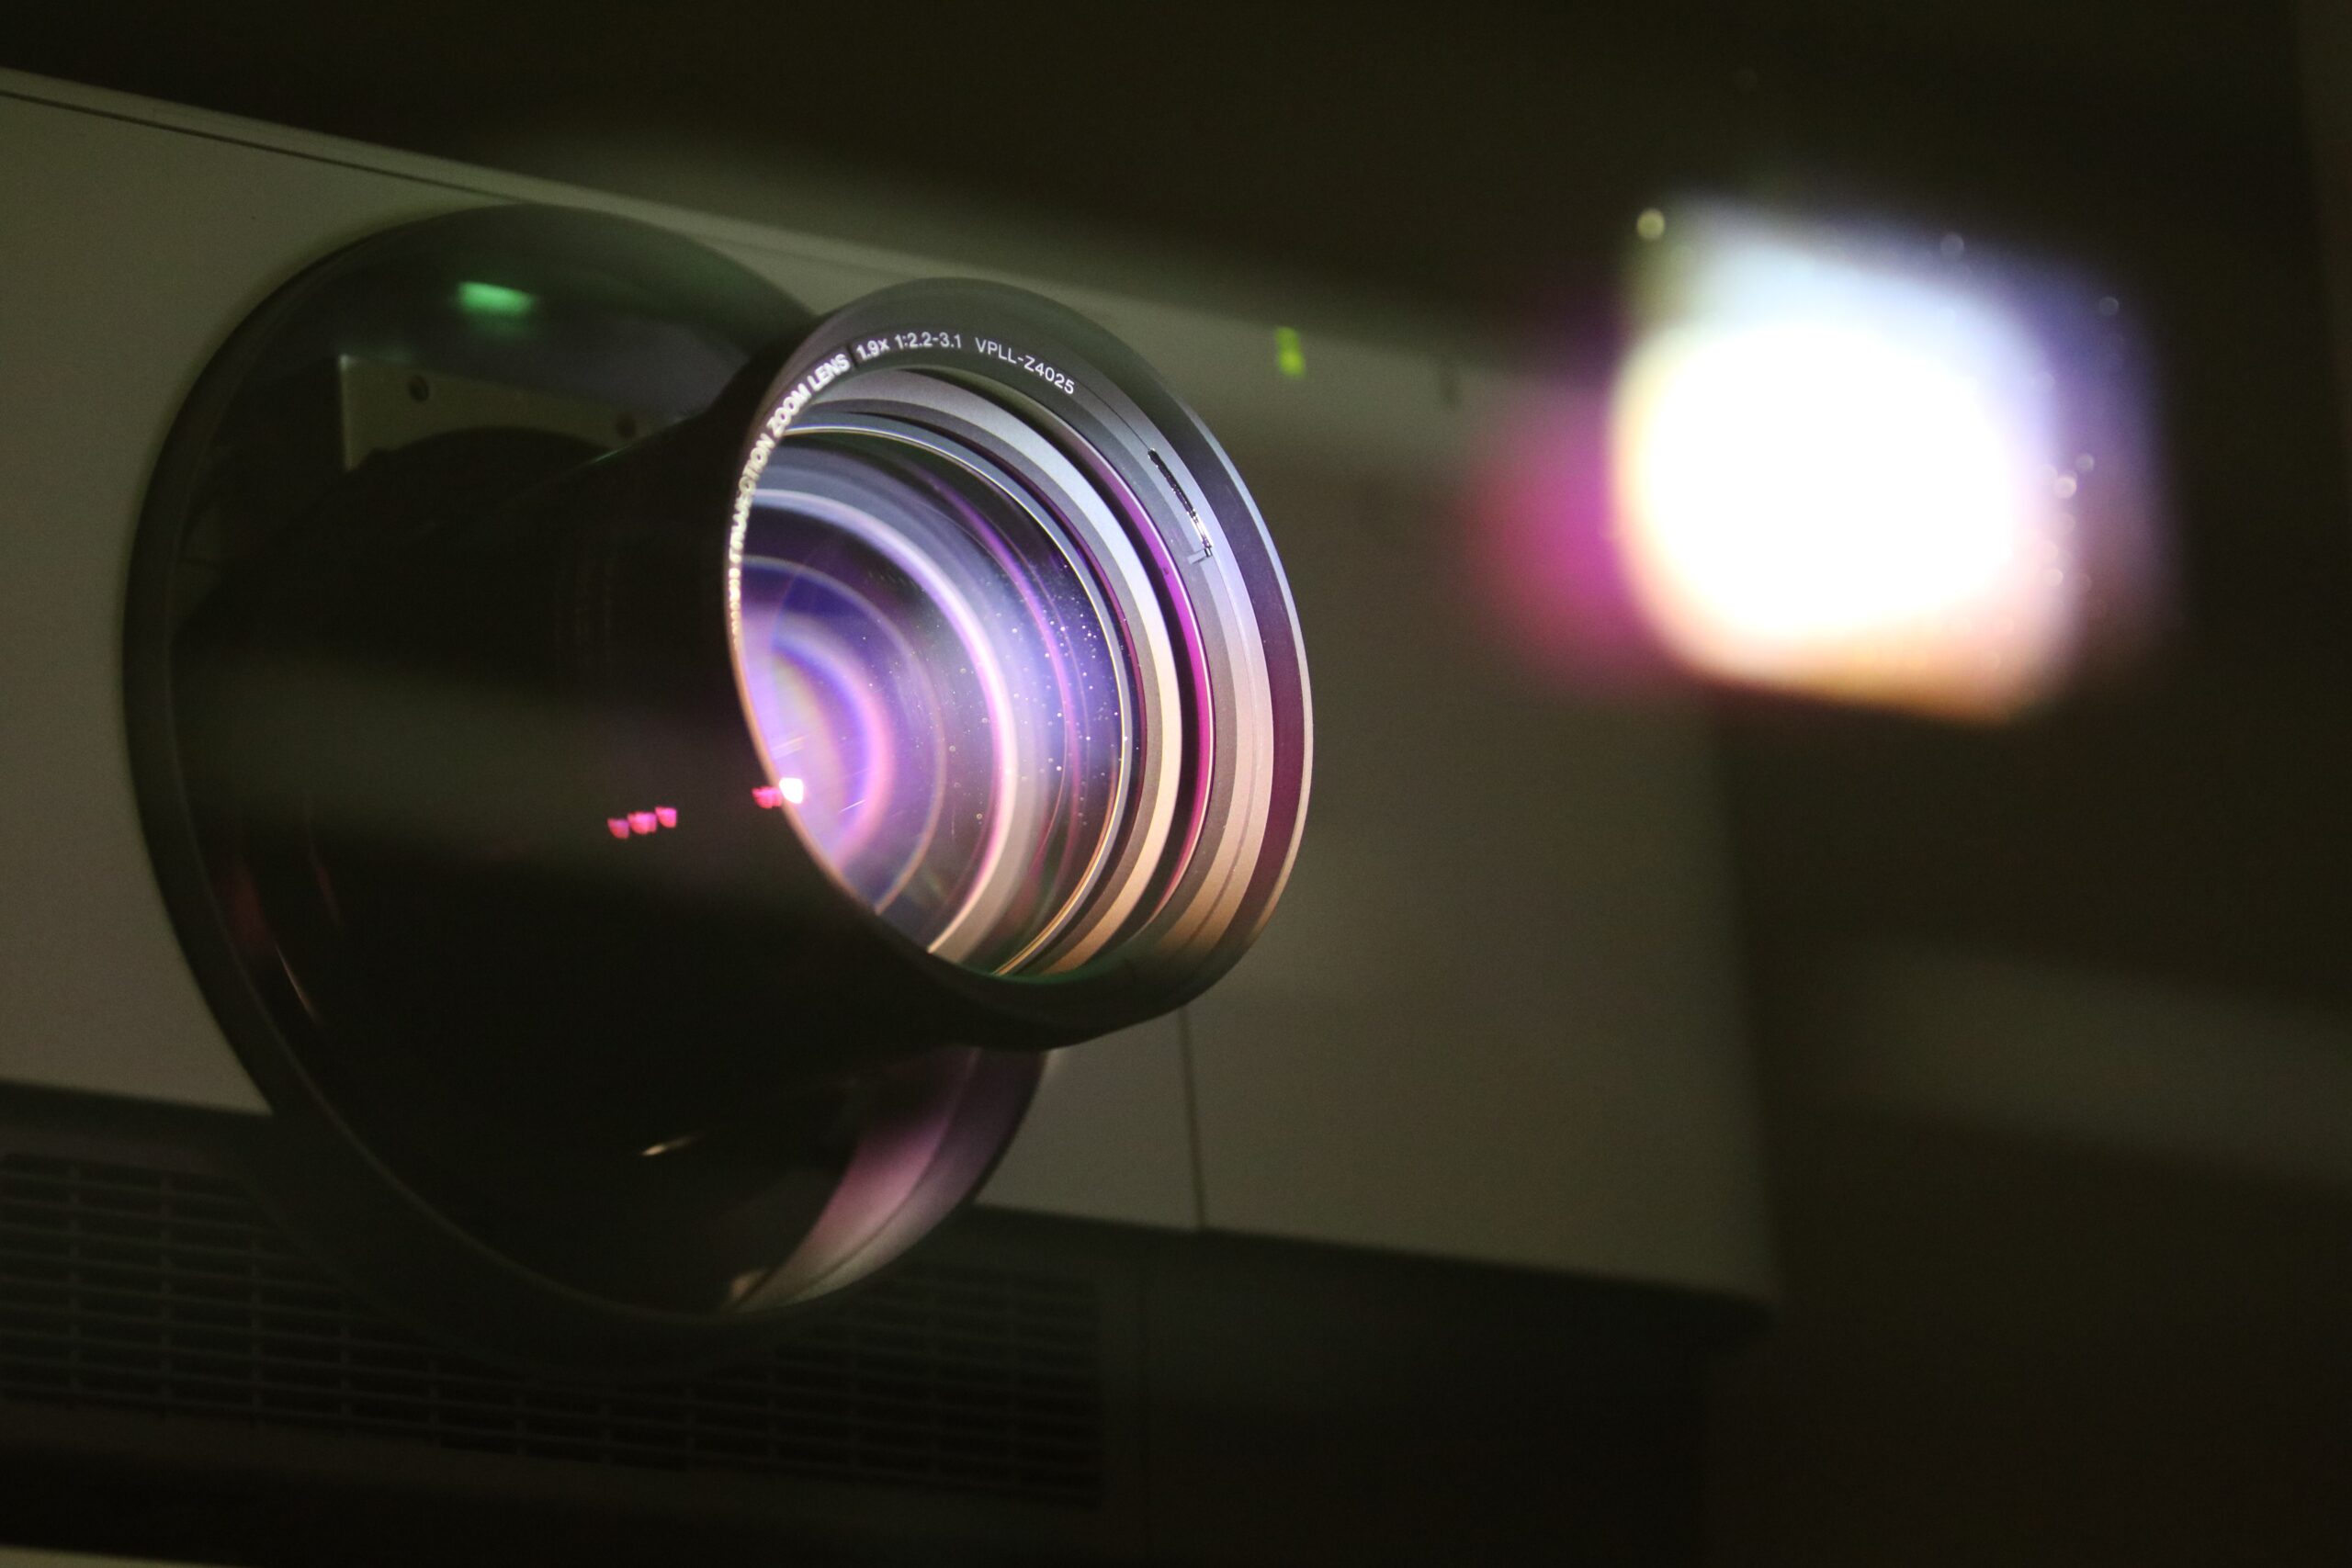 Tips for Proper Projector Care and Maintenance